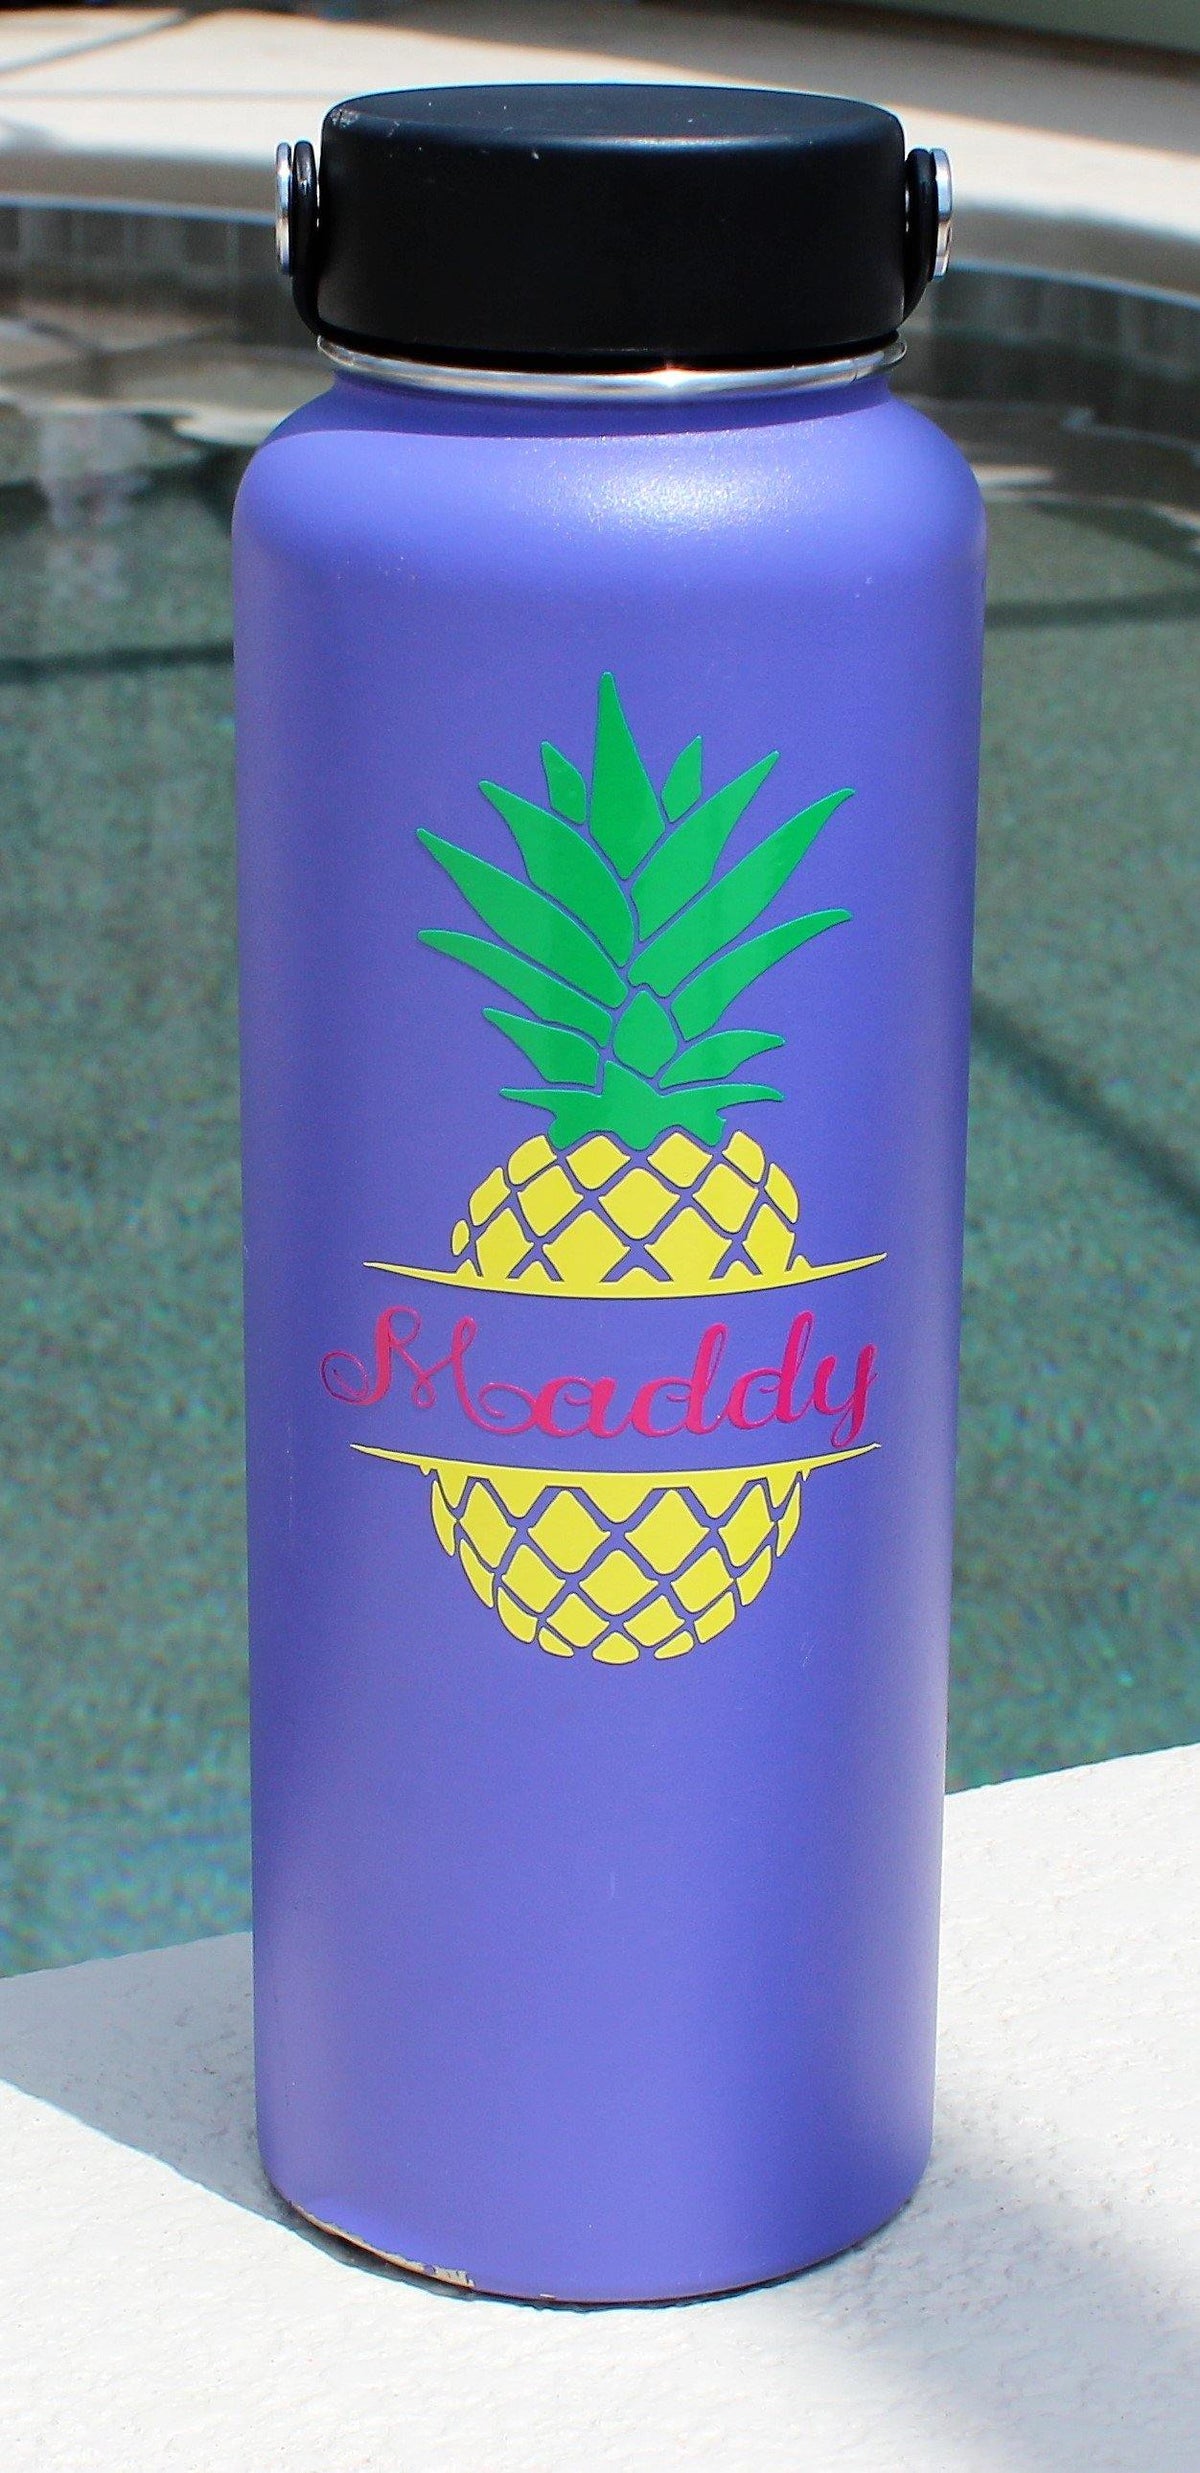 Door Decal | Personalized Vinyl Decal | Monogram Vinyl Decal | Custom Decal | Pineapple - This &amp; That Solutions - Door Decal | Personalized Vinyl Decal | Monogram Vinyl Decal | Custom Decal | Pineapple - Personalized Gifts &amp; Custom Home Decor